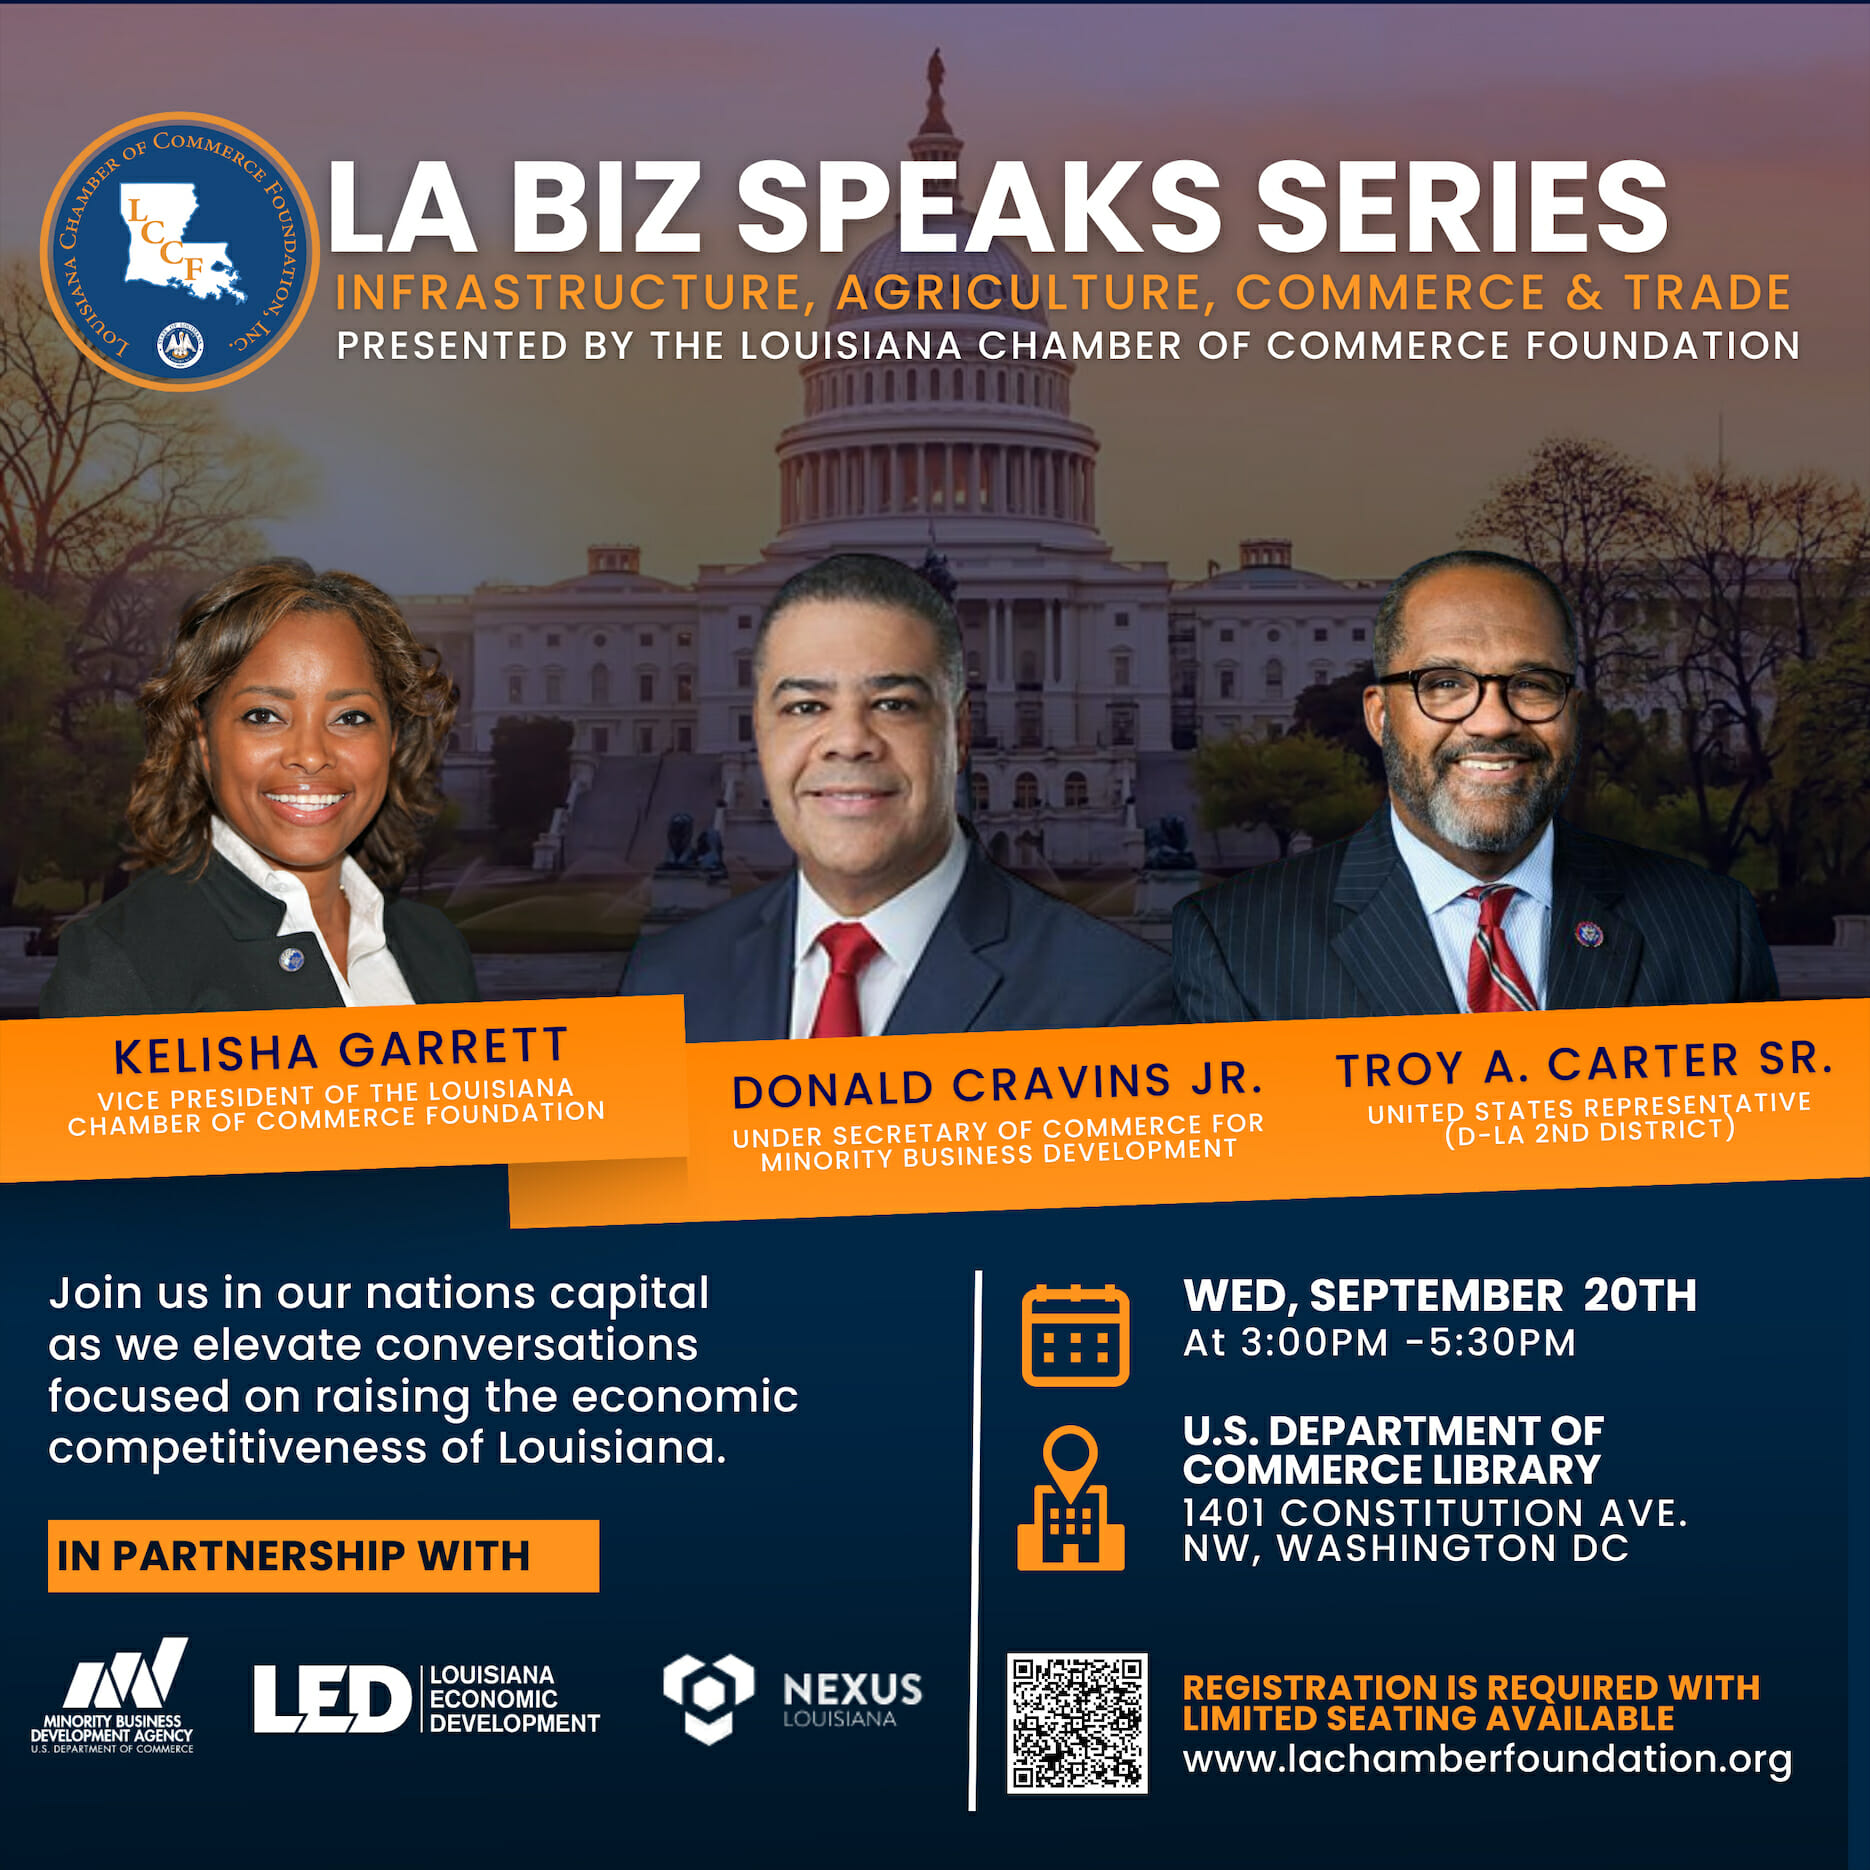 Louisiana Chamber of Commerce Foundation announces highly anticipated programming to occur in Washington, DC during the Congressional Black Caucus Conference